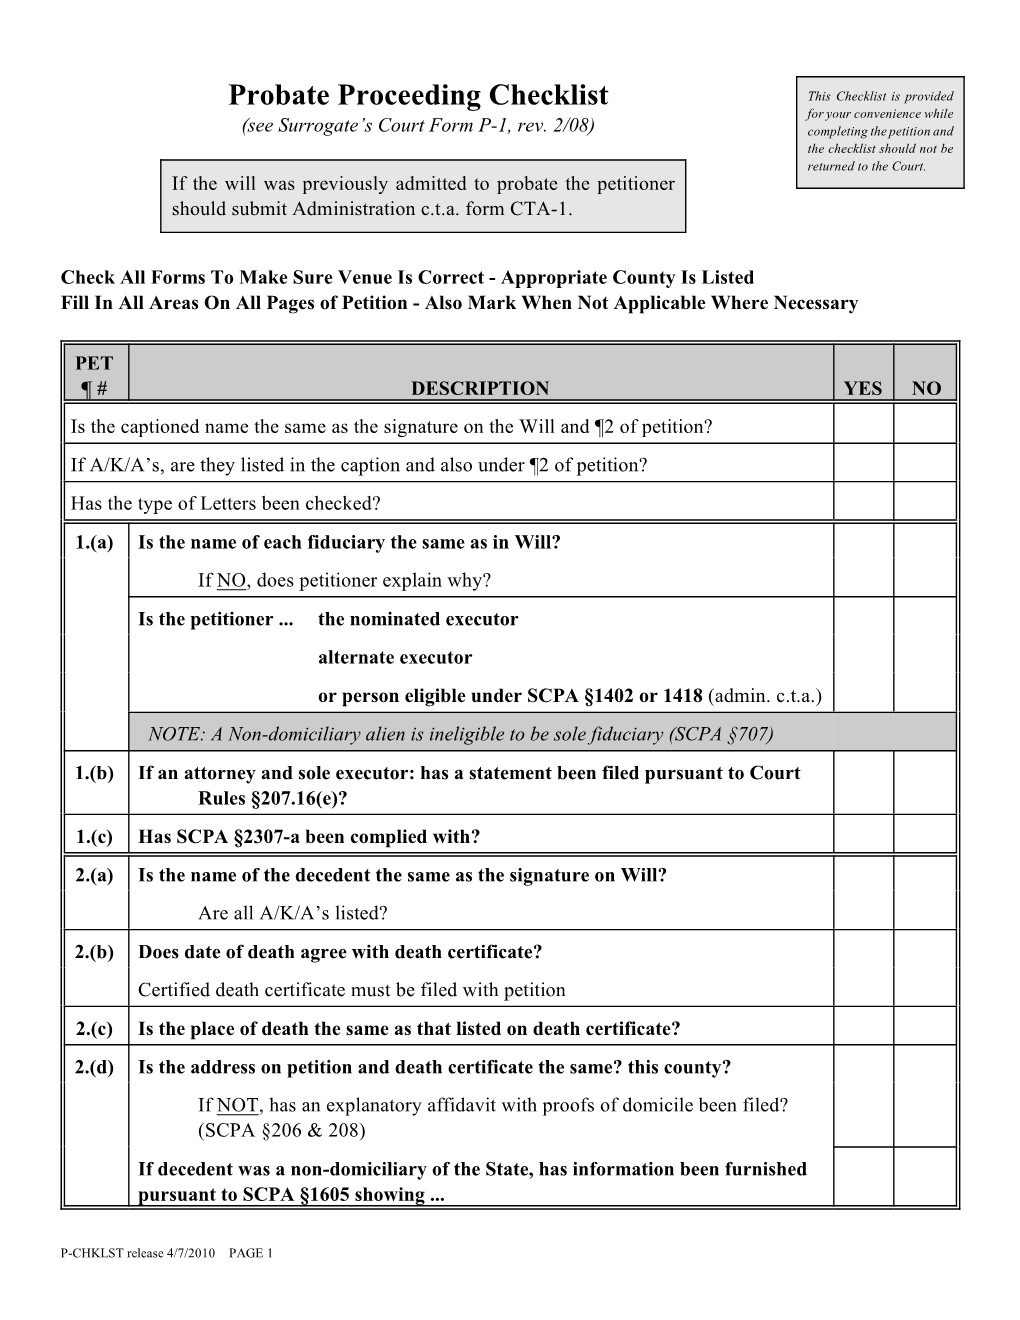 Probate Proceeding Checklist This Checklist Is Provided for Your Convenience While (See Surrogate’S Court Form P-1, Rev